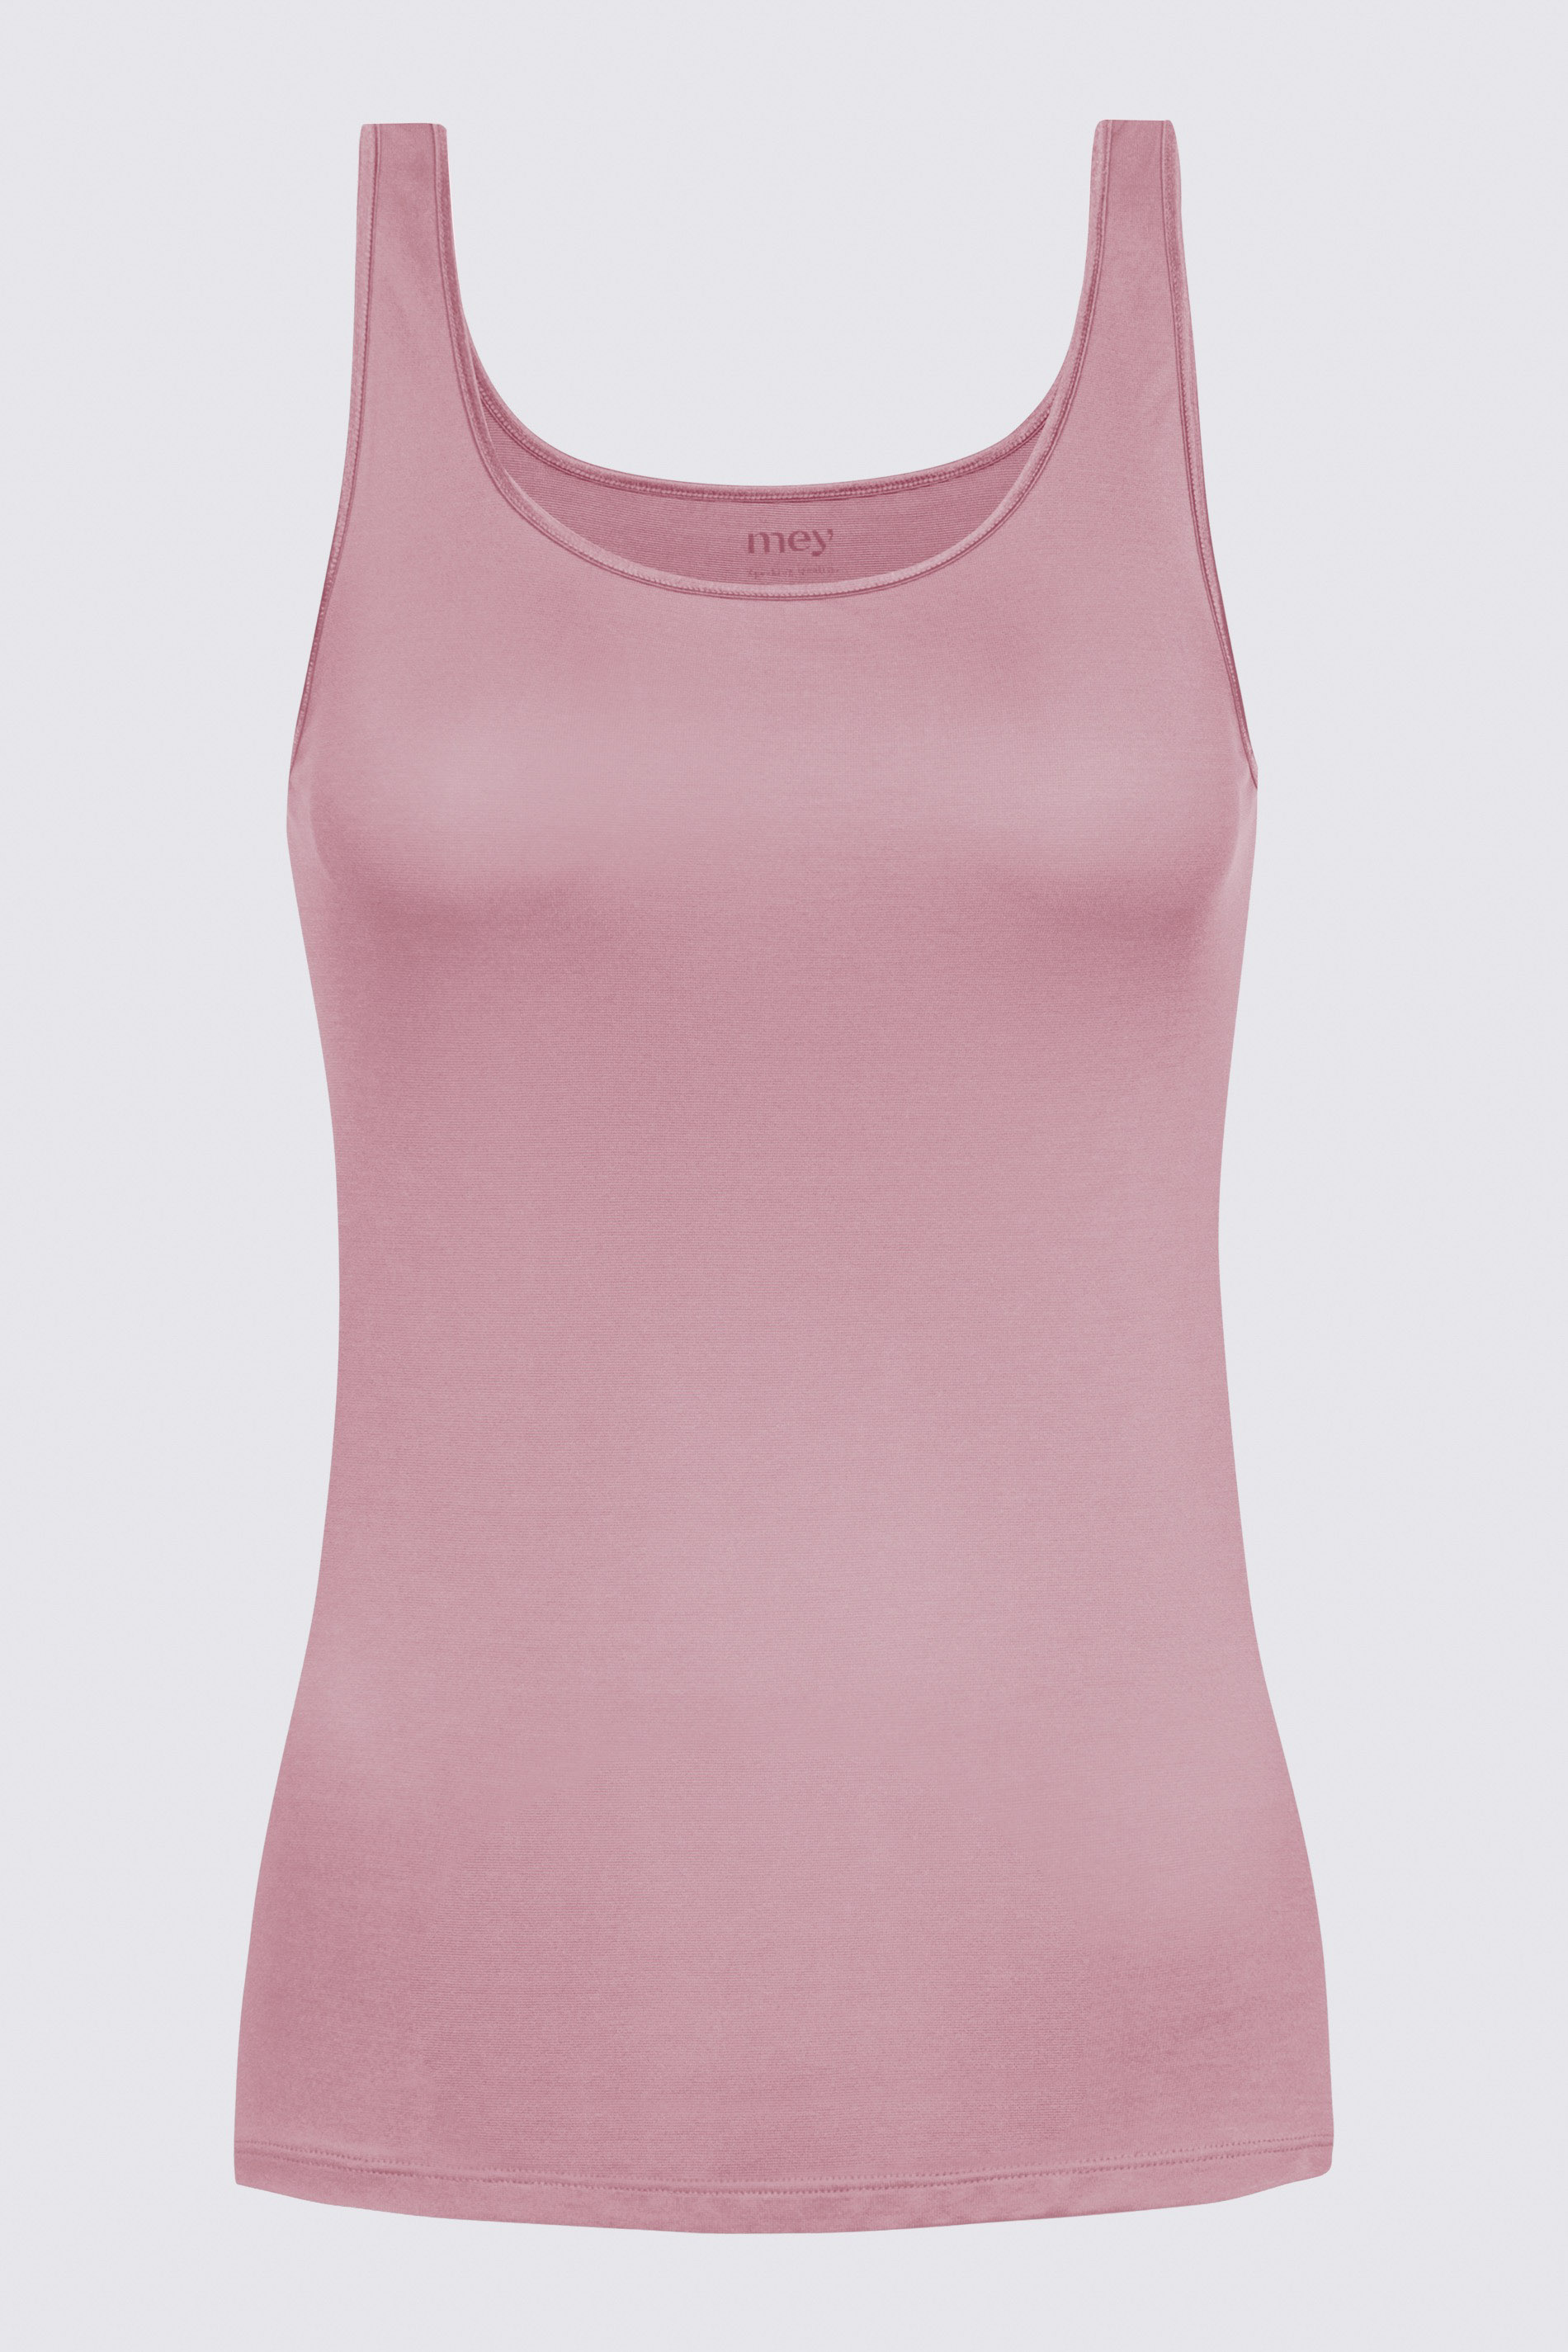 Camisole Serie Emotion Cut Out | mey®